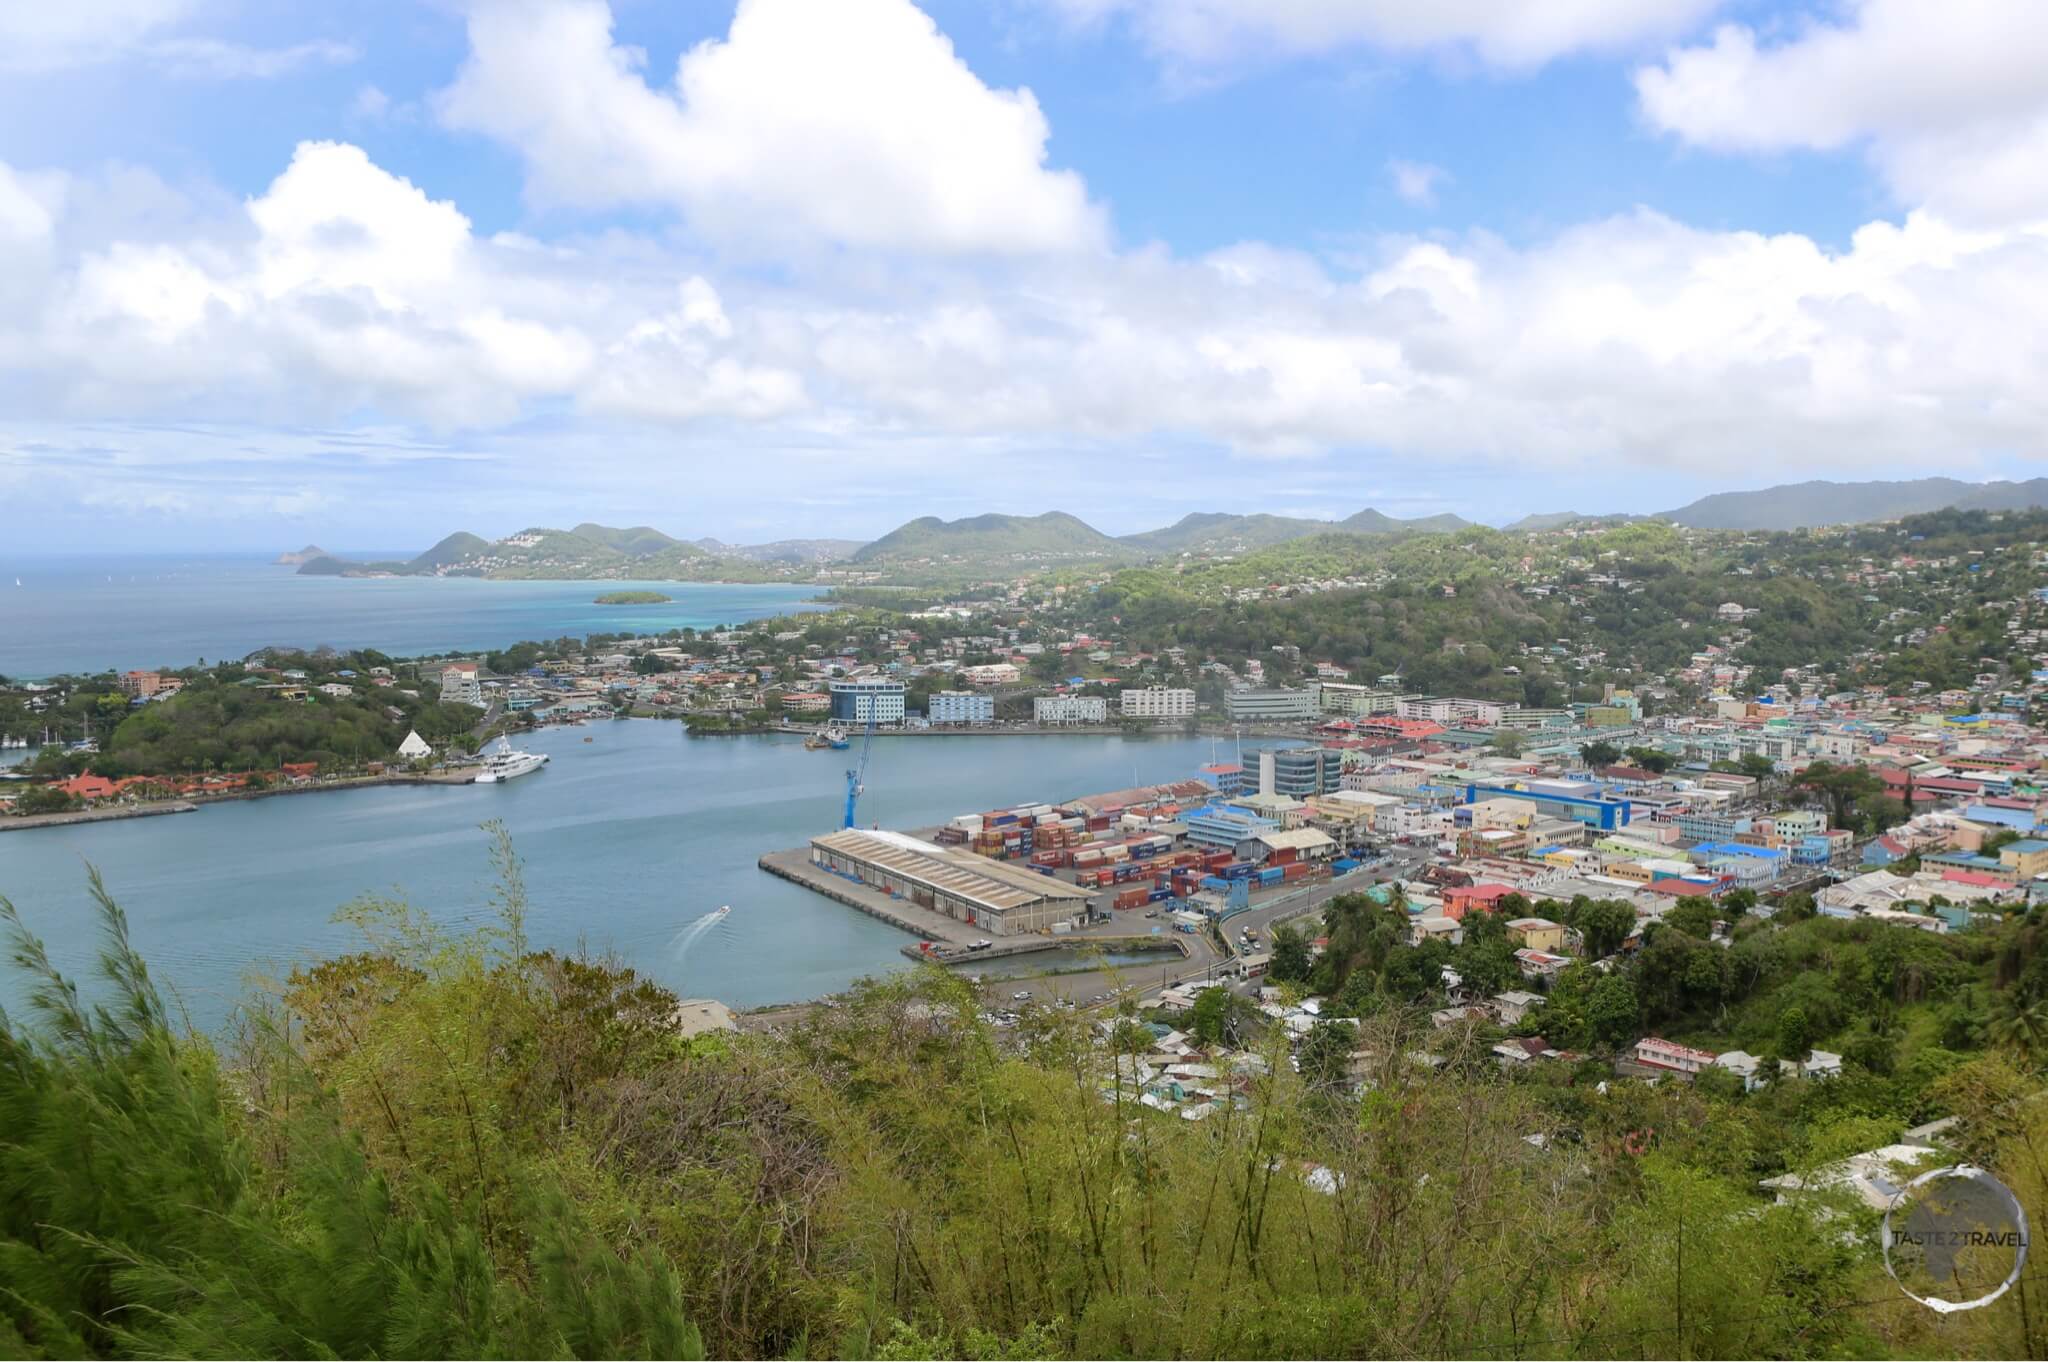 A view of the capital, Castries, from Morne Fortune.